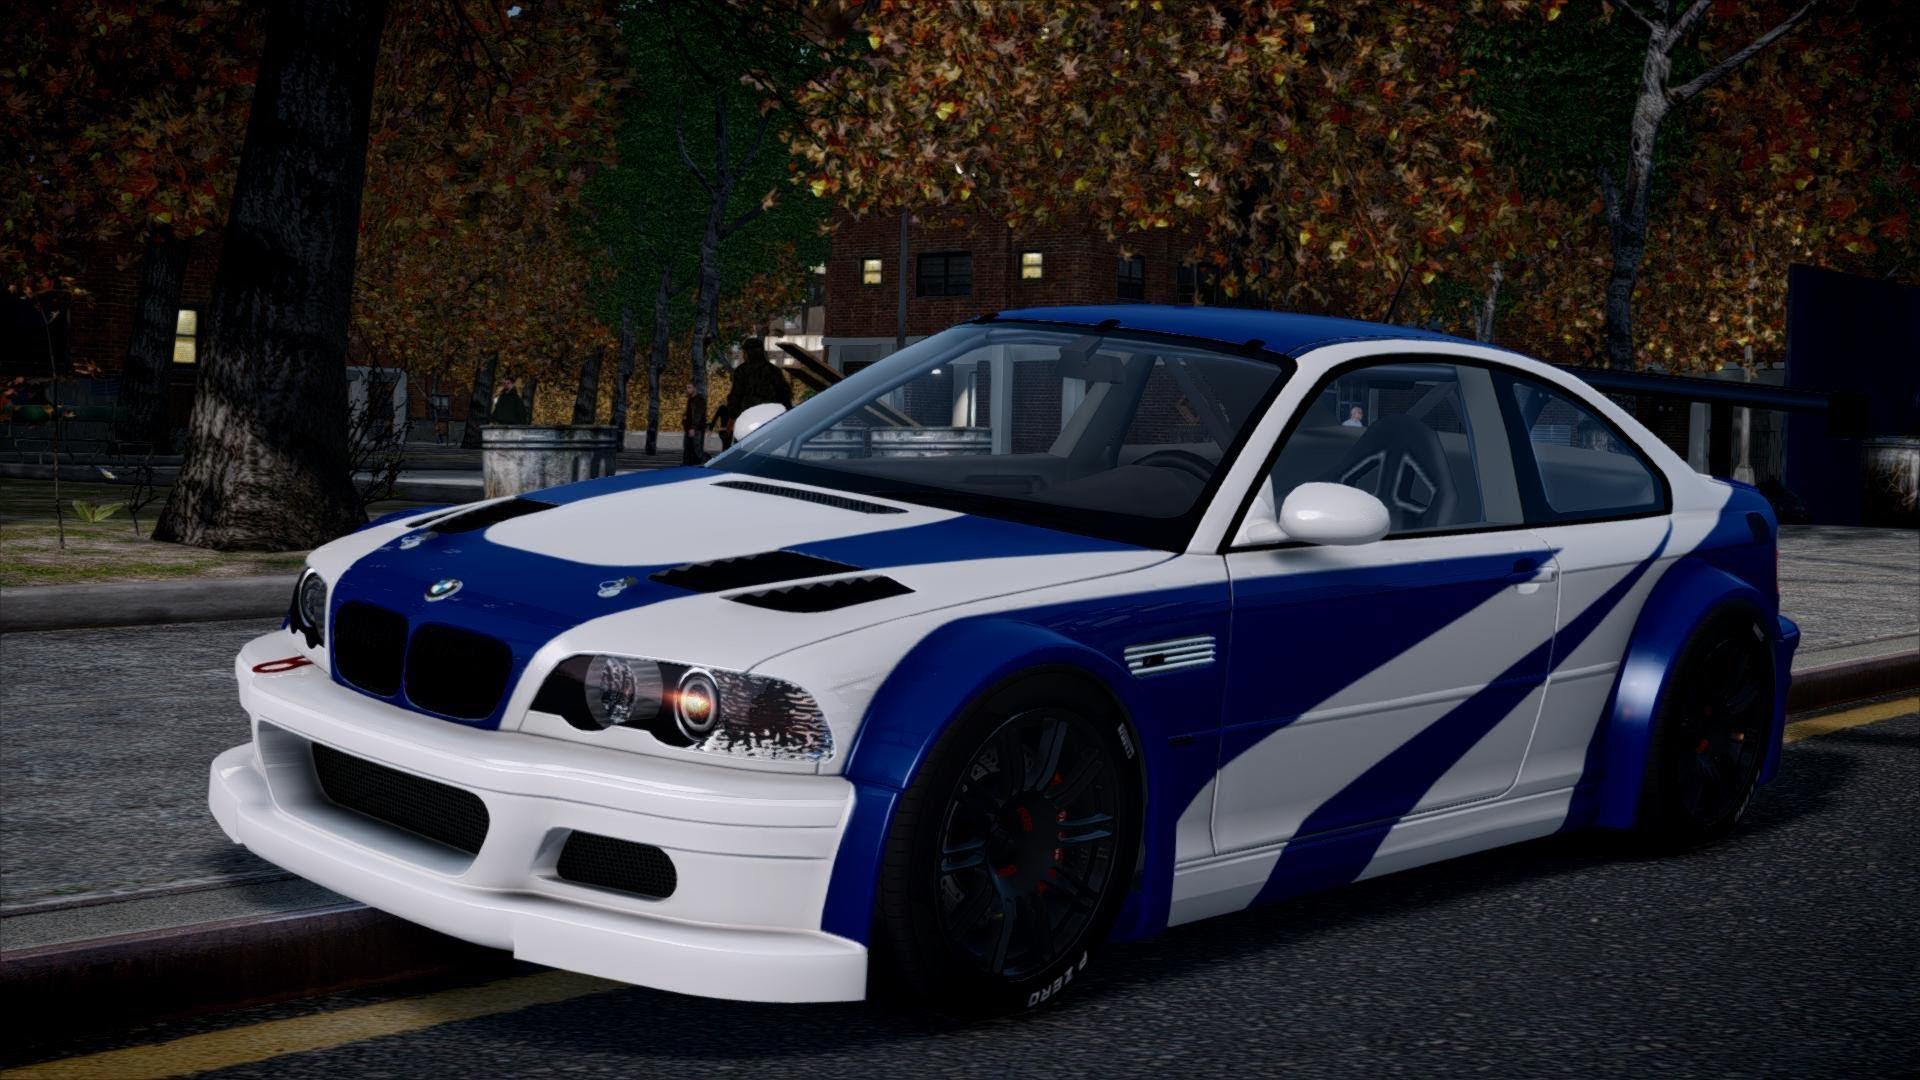 Bmw M3 Gtr Picture to